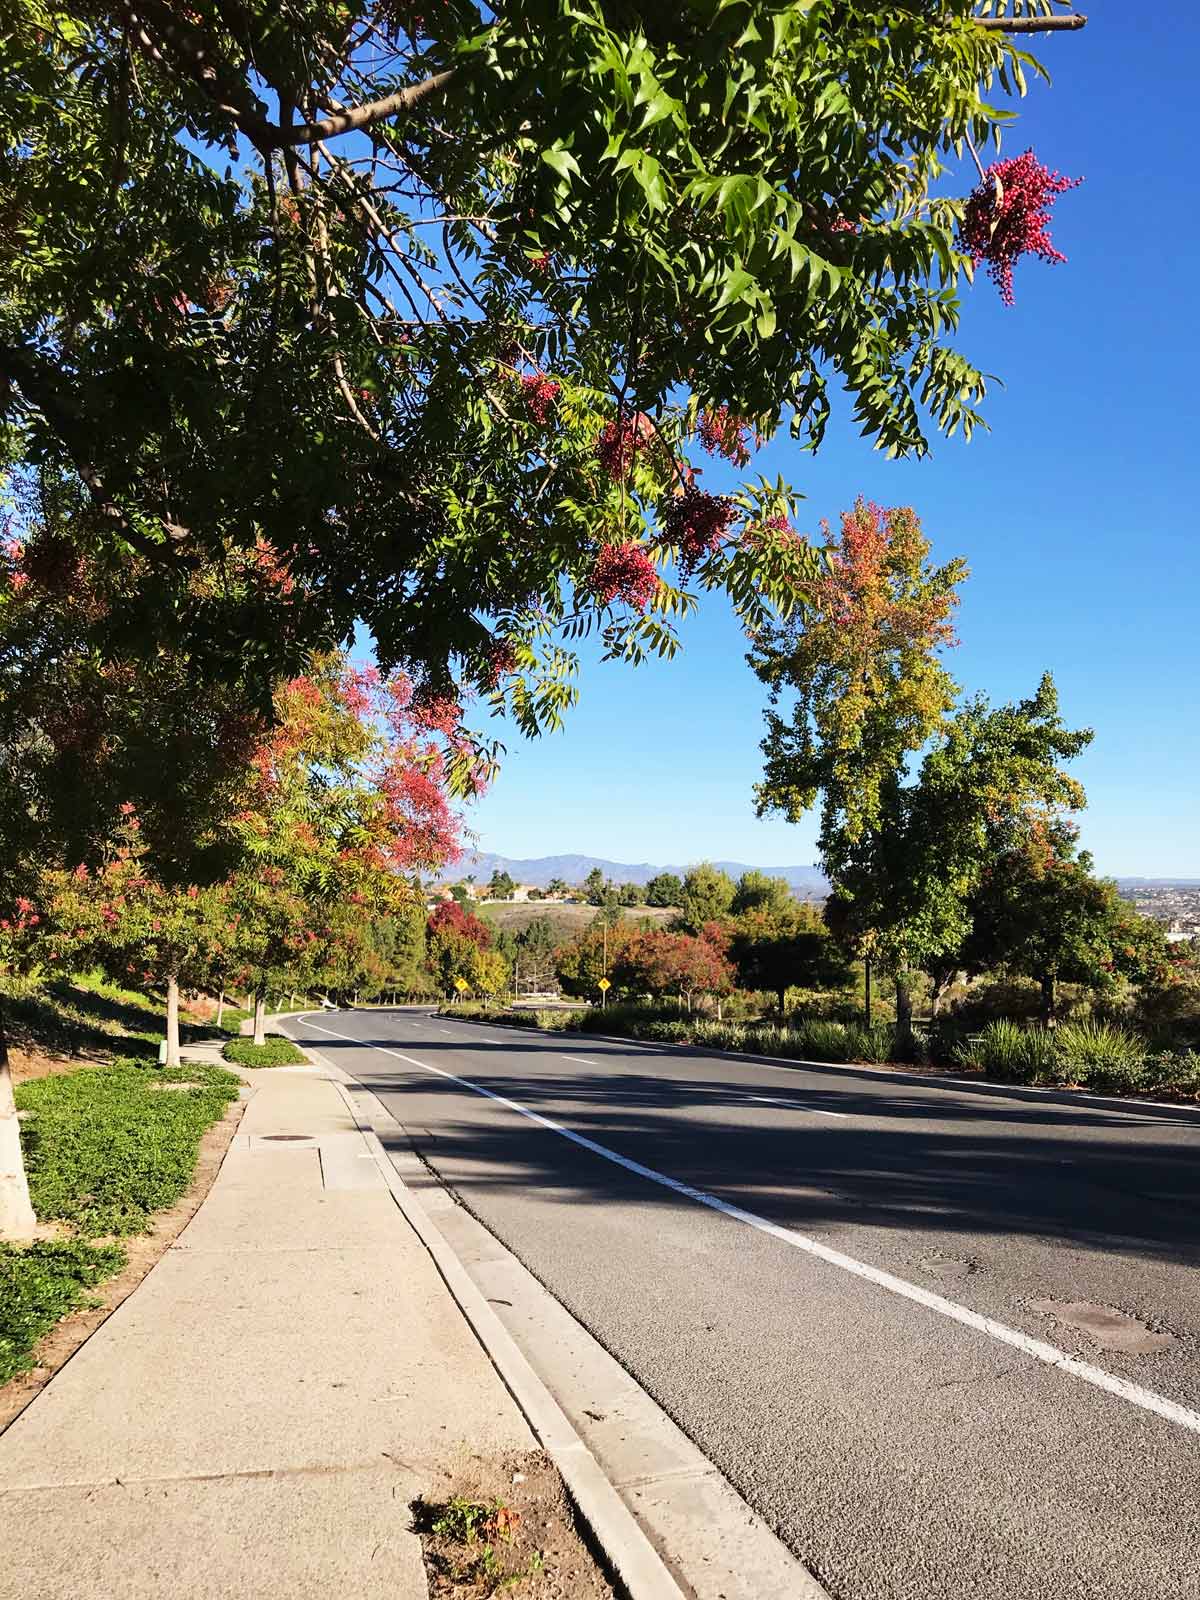 trees that are changing to fall colors along a deserted boulevard on a sunny day.